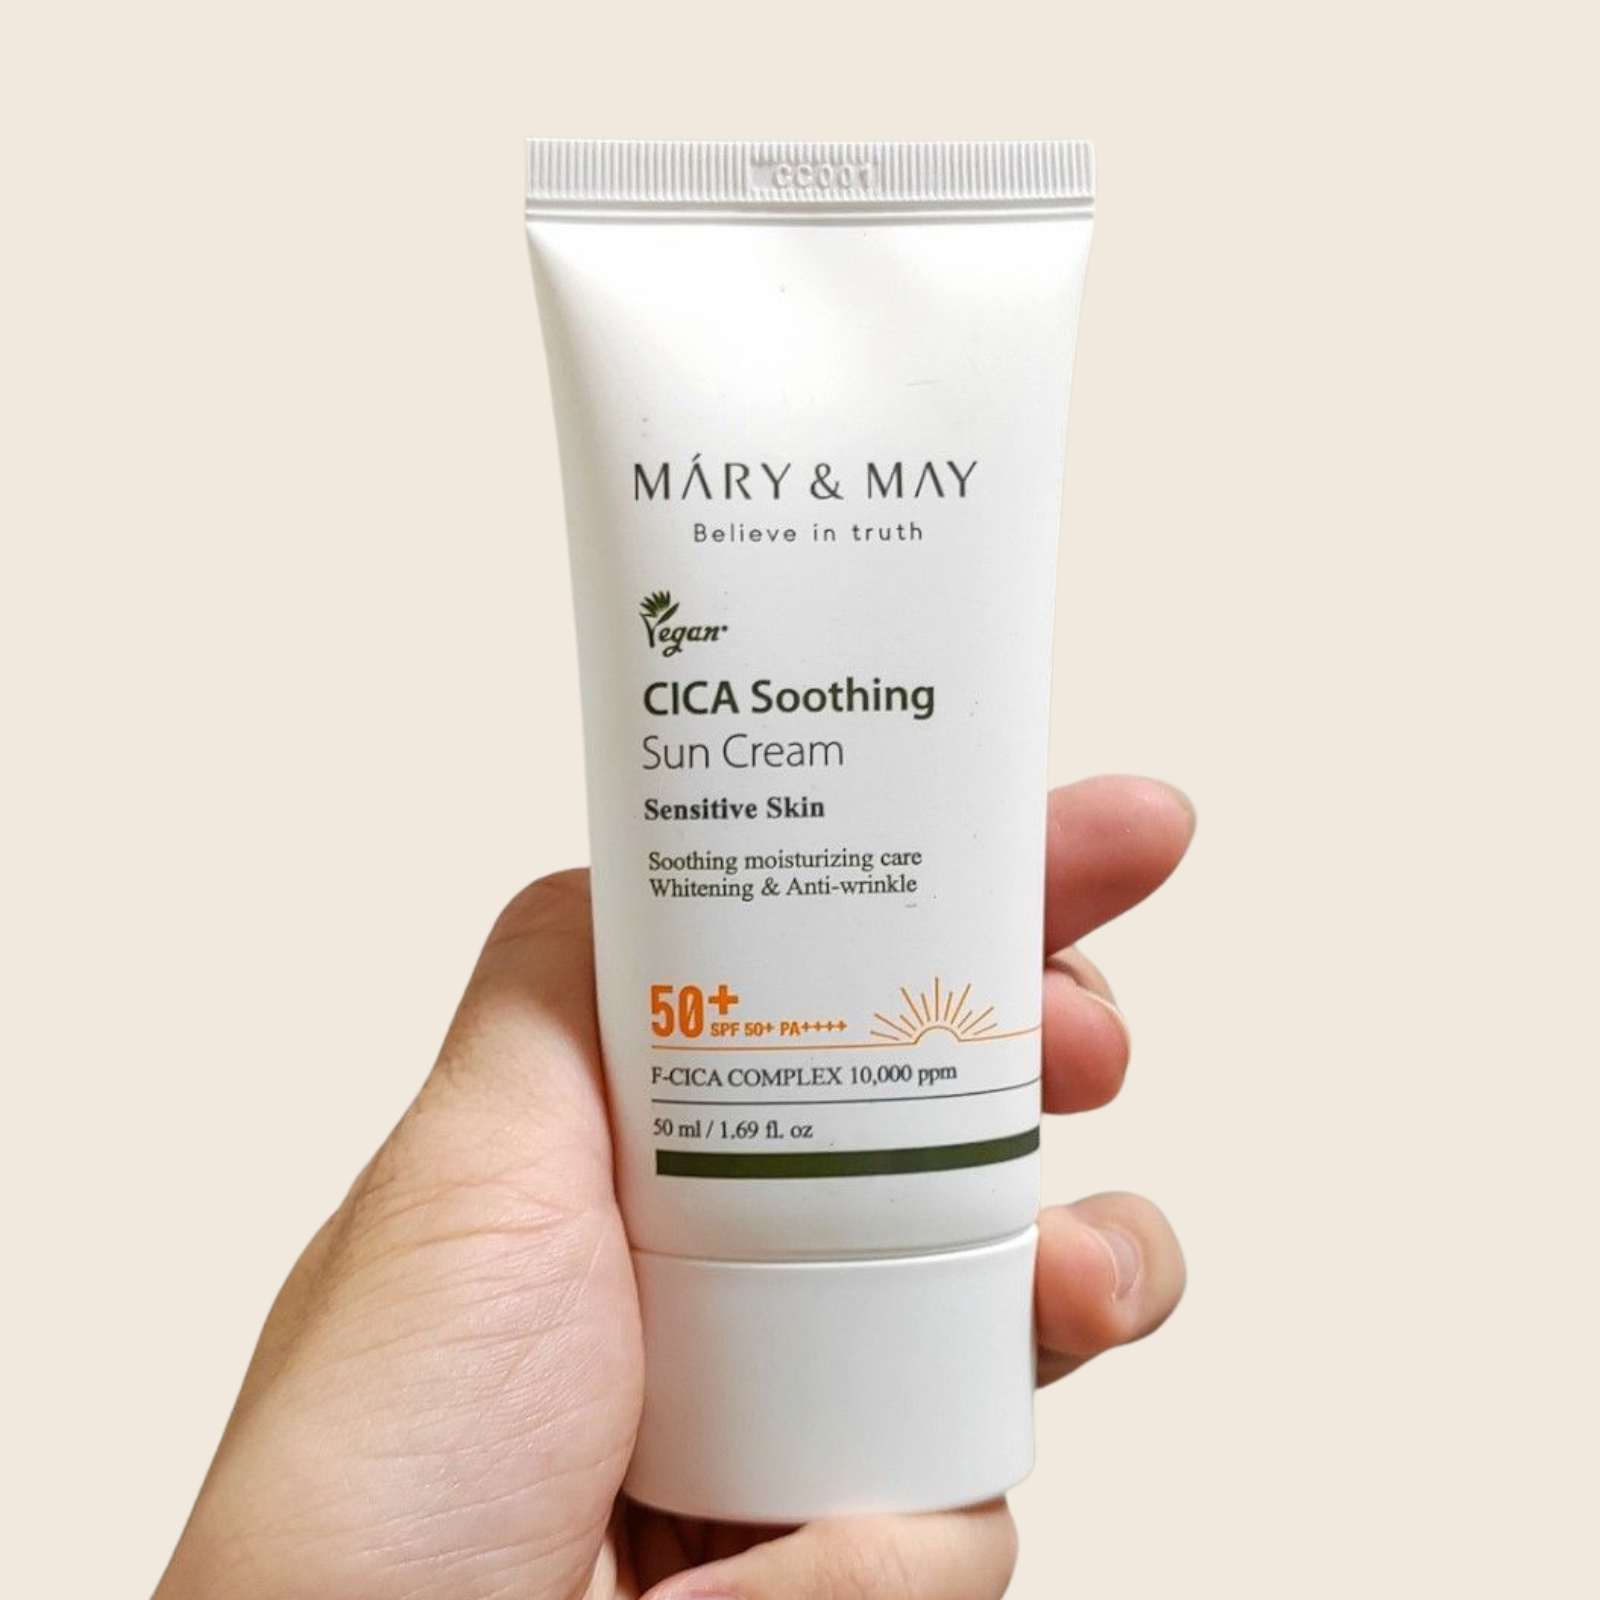 Soothing sunscreen with centella by Mary & May (Mary & May Cica Soothing Sun Cream SPF50+ PA++++)